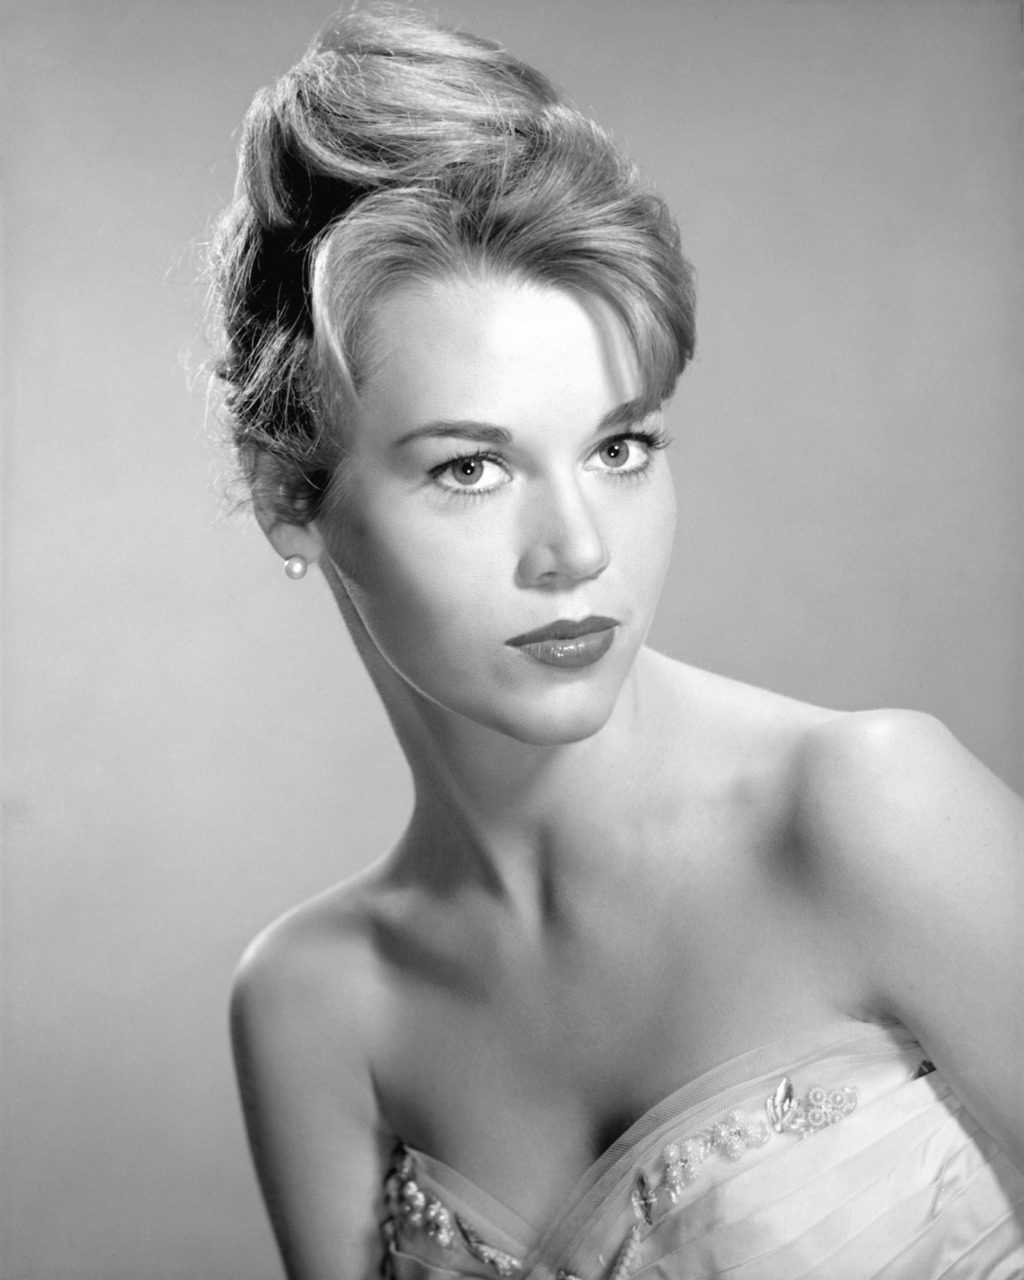 Jane Fonda At The Age Of 23 Photographed In 1960 NSF